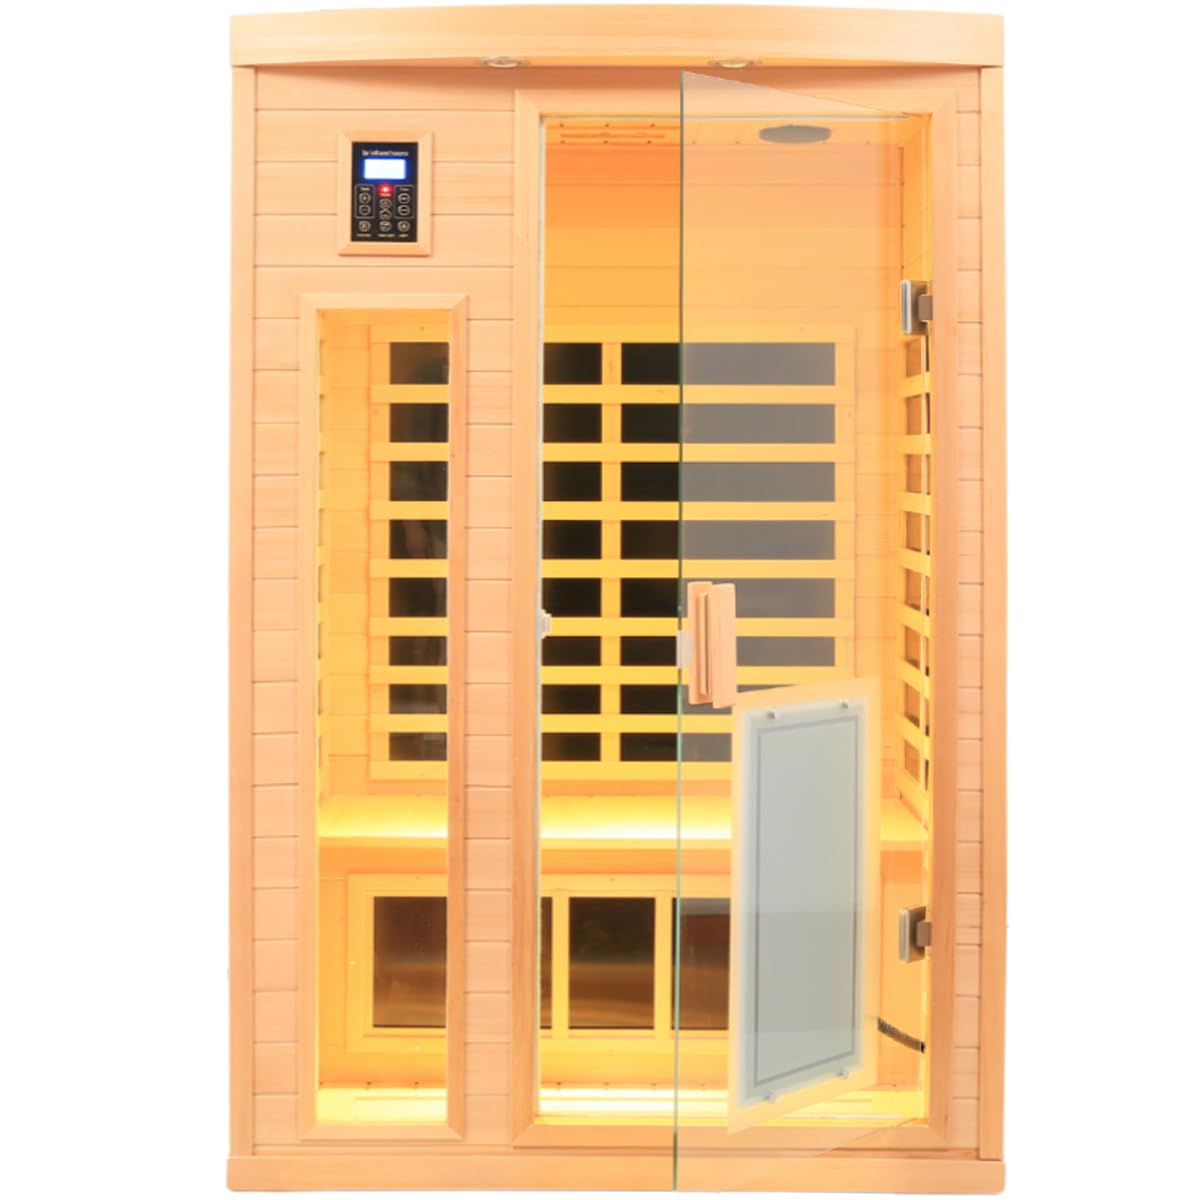 LTCCDSS 2 Person Low EMF Infrared Sauna, Hemlock Wooden Far Infrared Sauna for Home, with Bluetooth Speakers, LED Reading Lamp and Chromotherapy Lamp Indoor Sauna Room